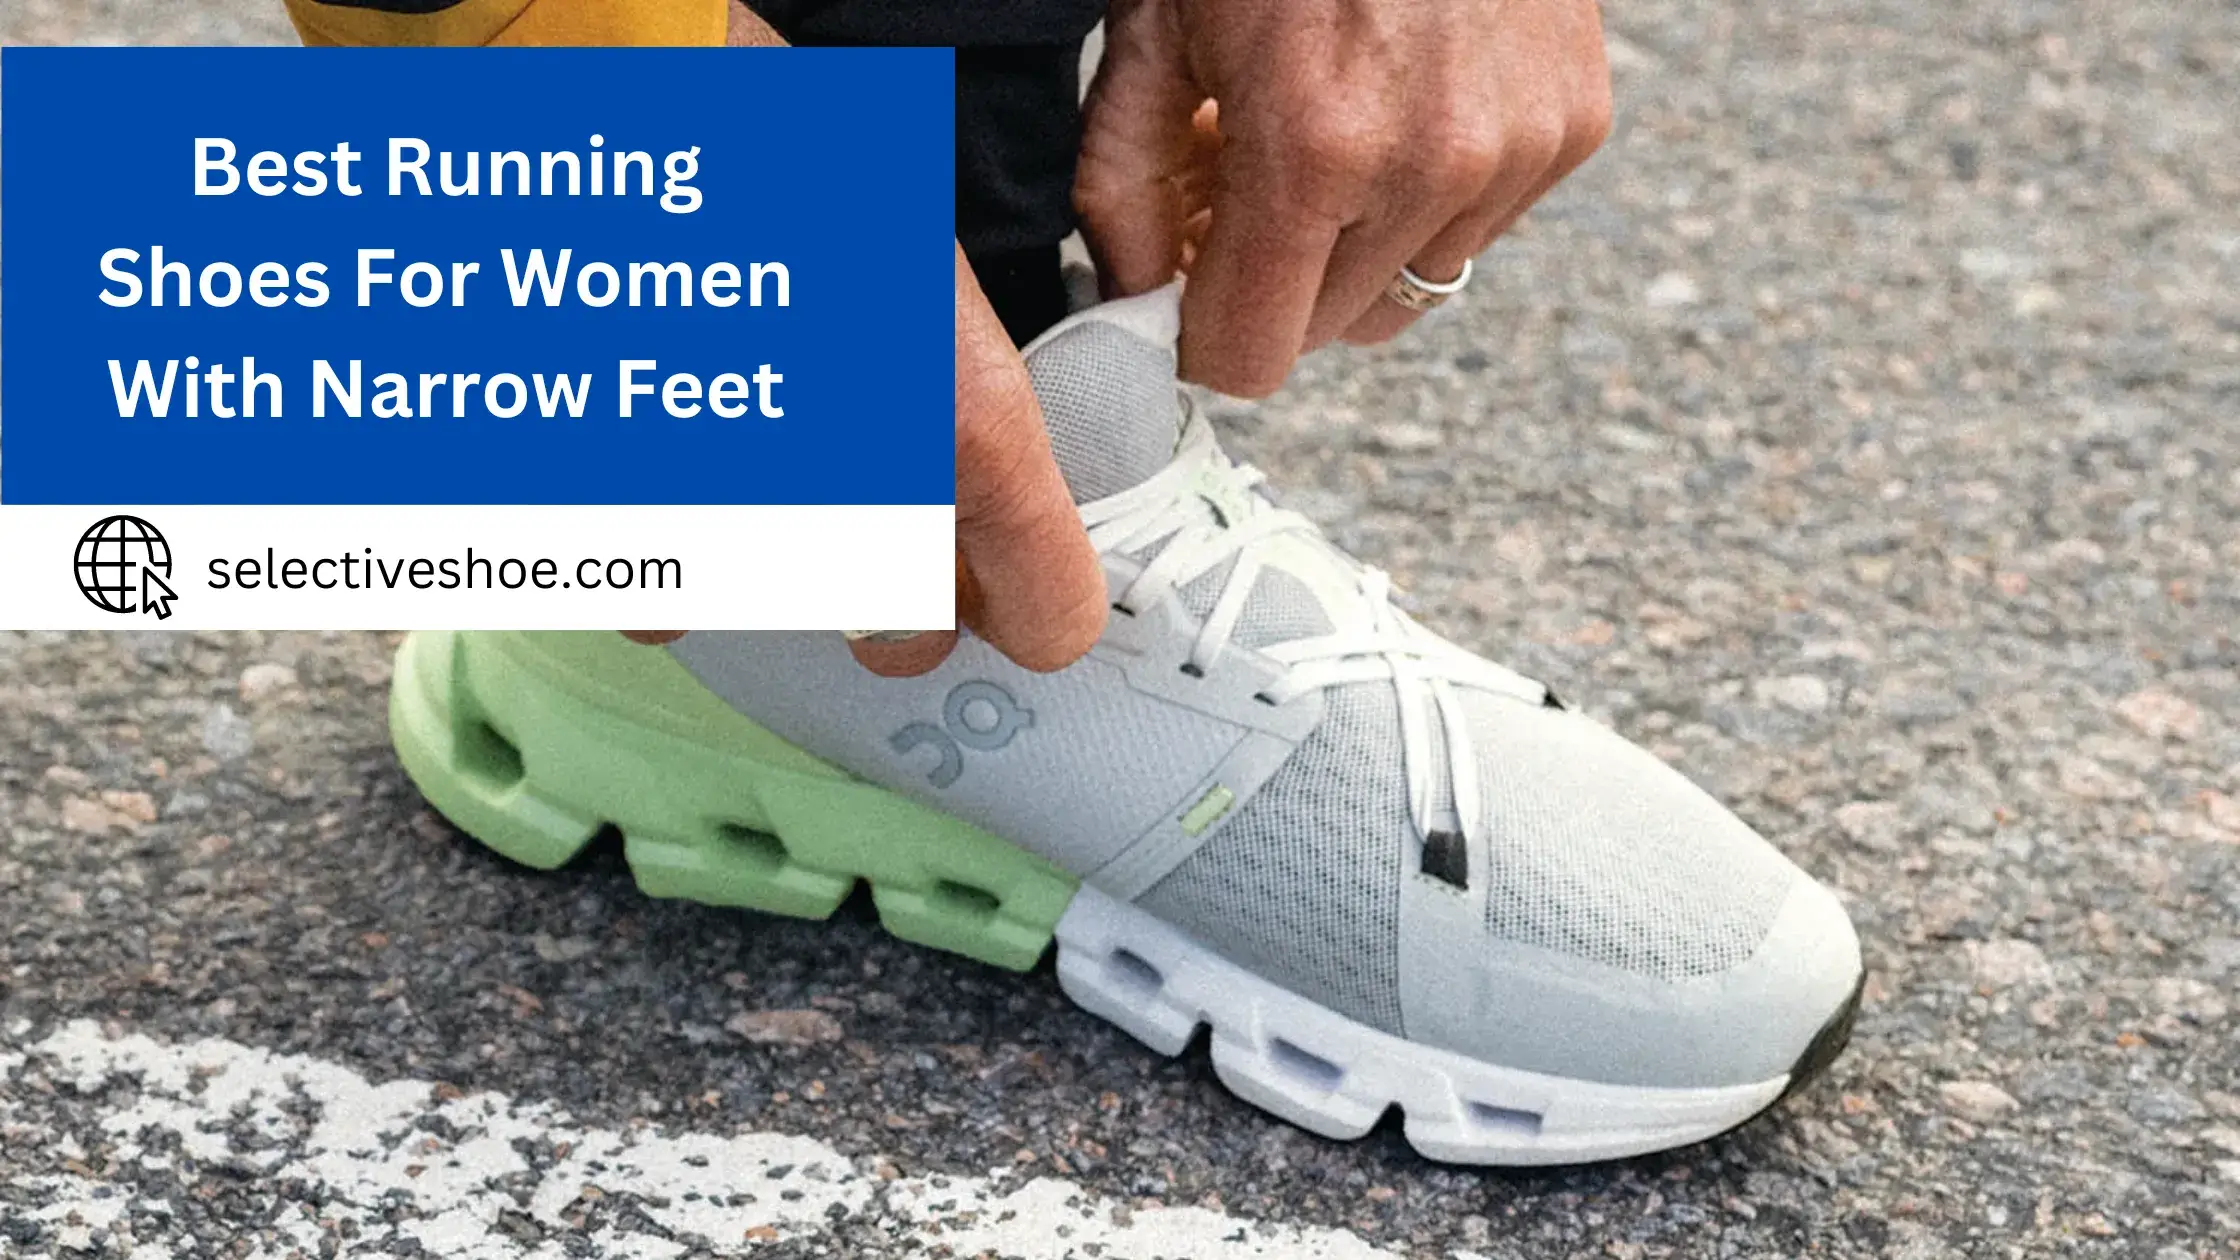 Best Running Shoes For Women With Narrow Feet